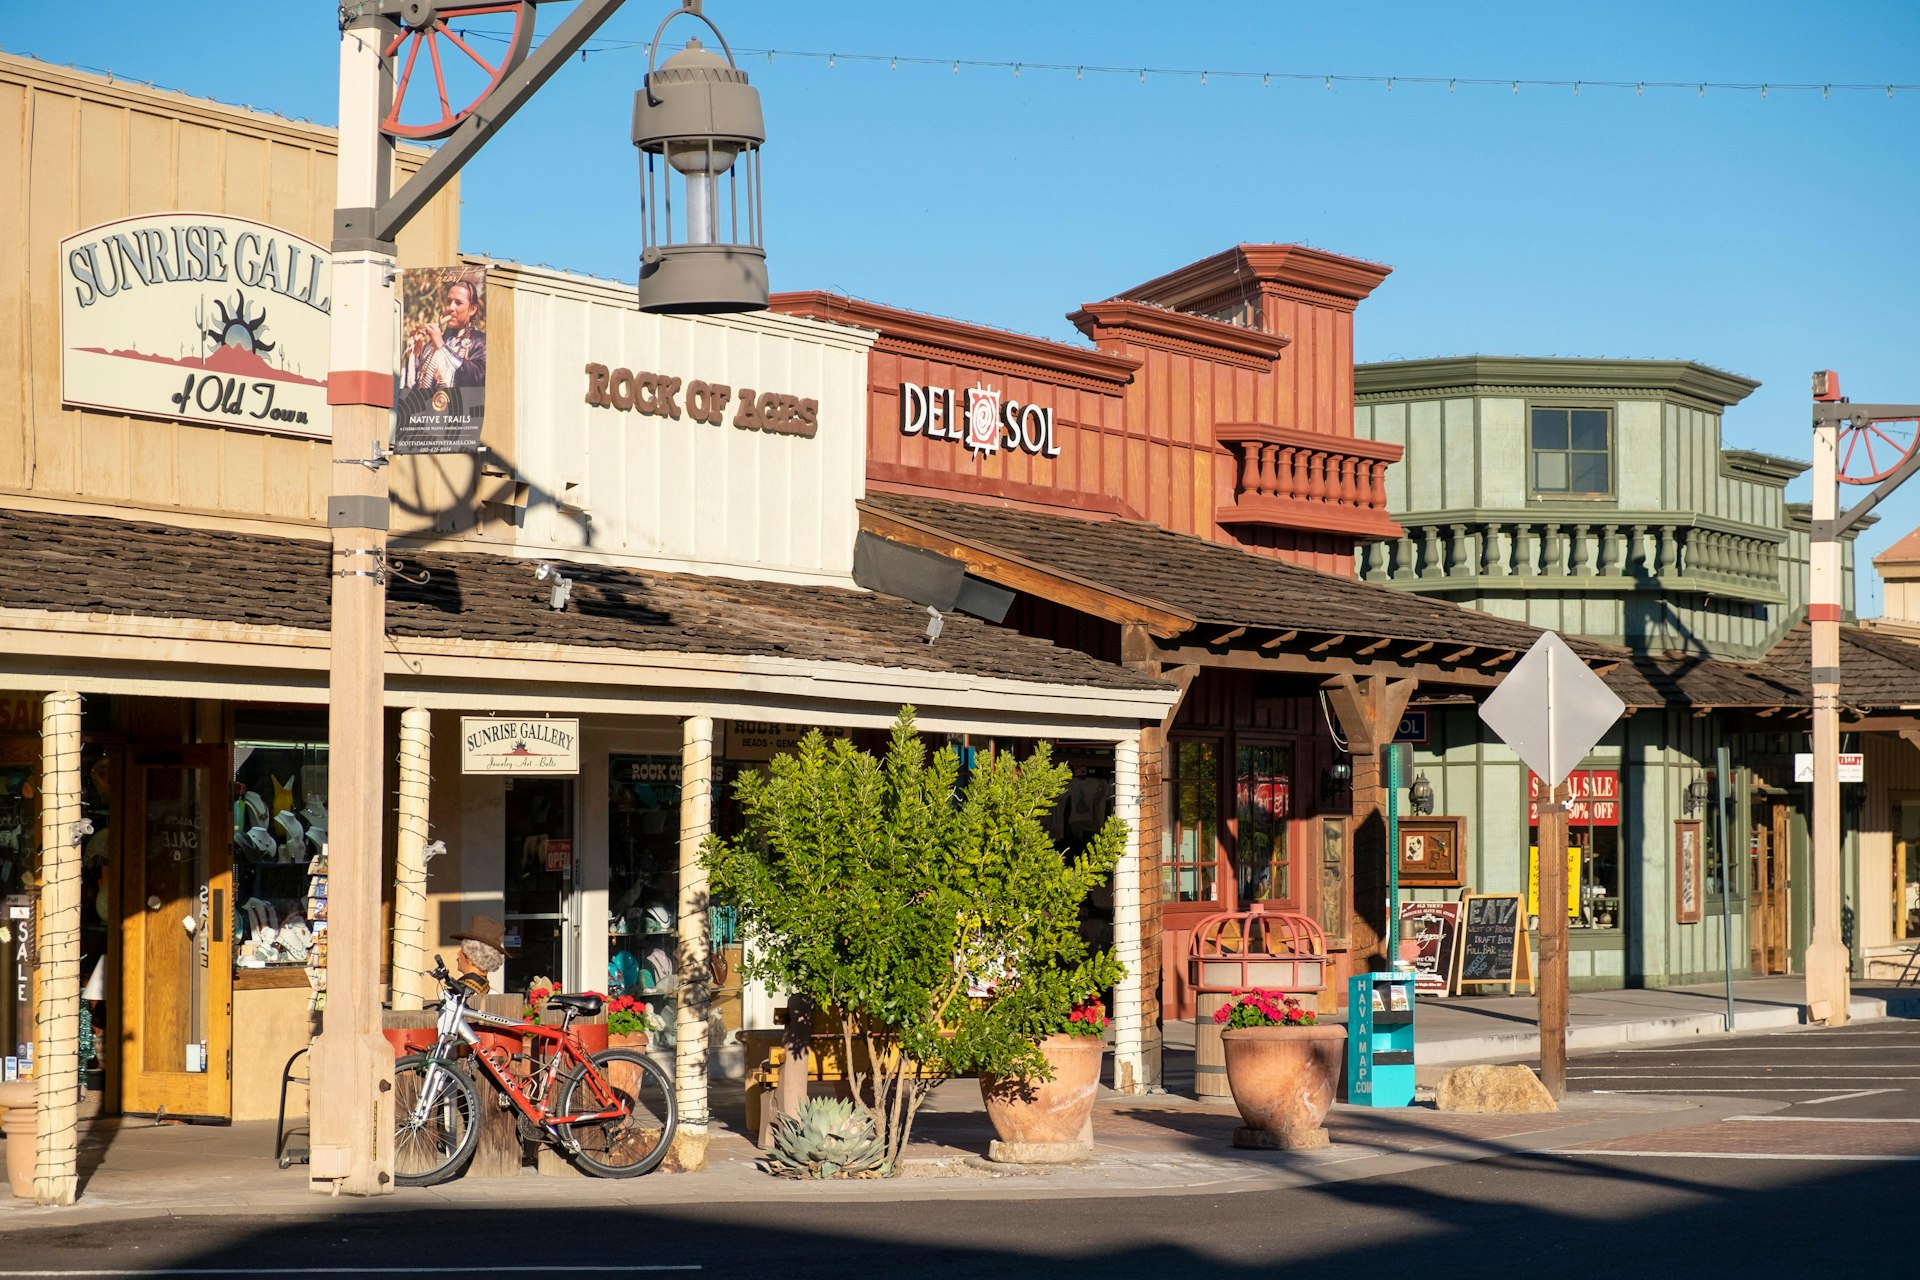 A row of old stores in Old Town Scottsdale, Scottsdale, Phoenix, Arizona, USA